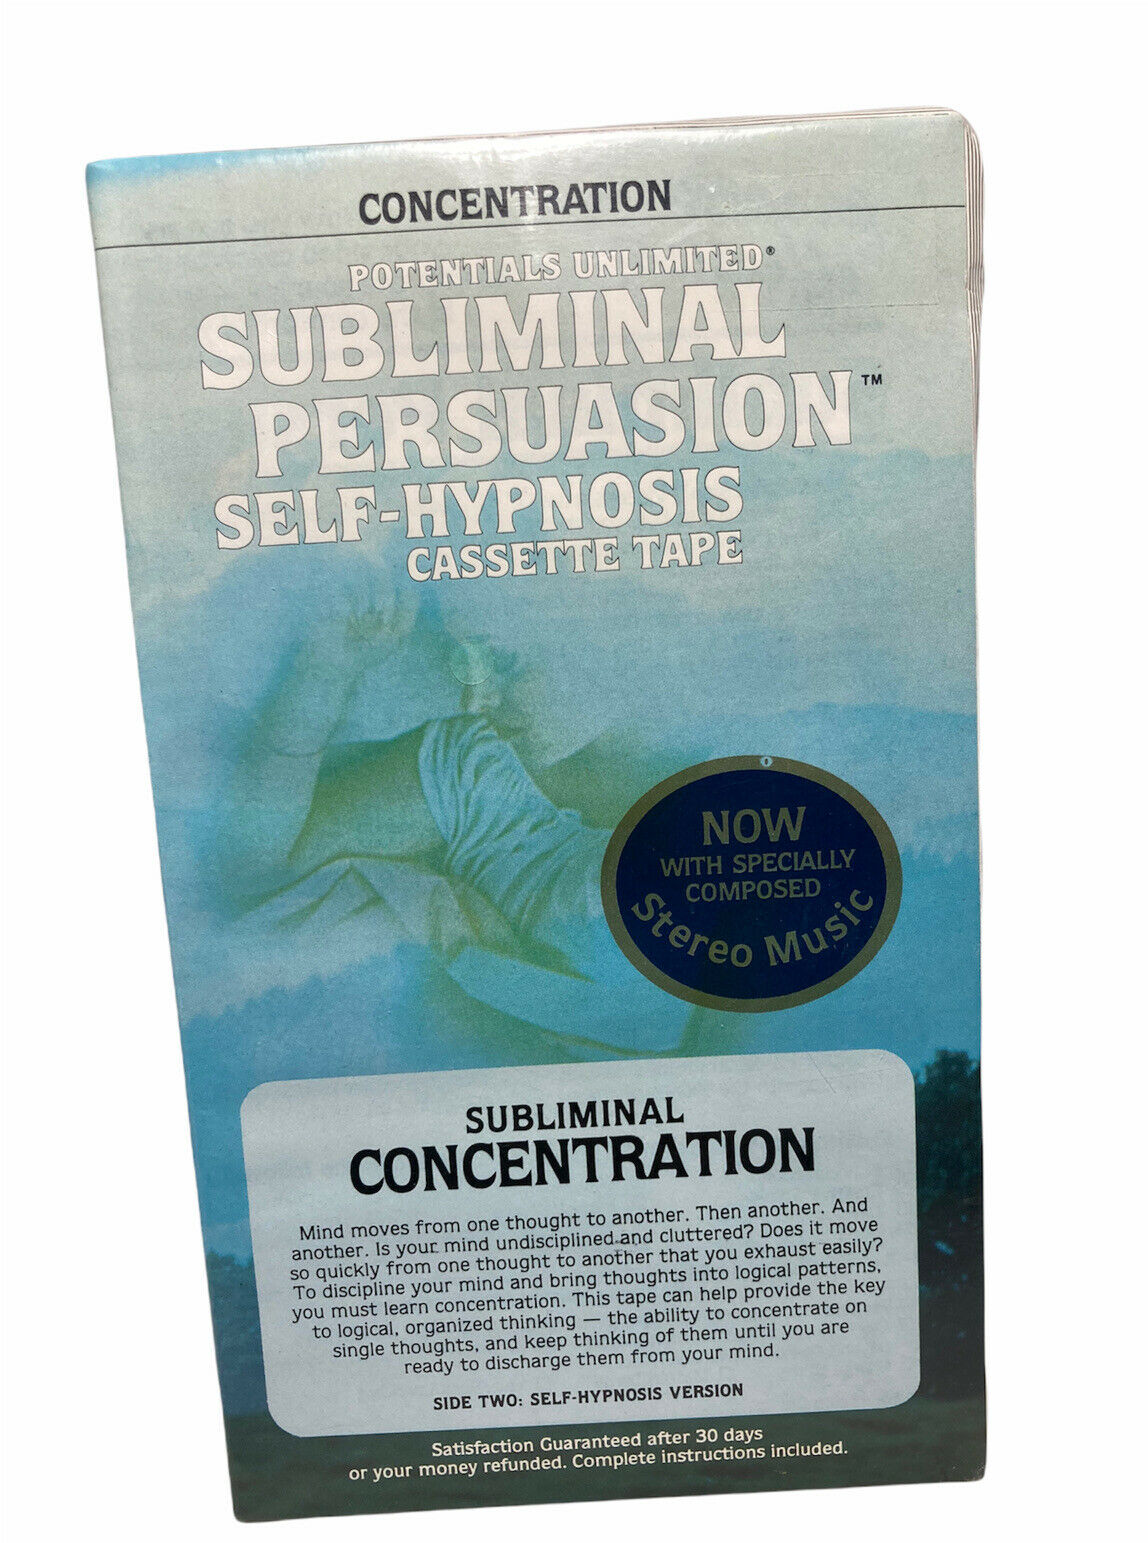 Brand New!potentials Unlimited Subliminal Persuasion Self-hypnosis Cassette Tape